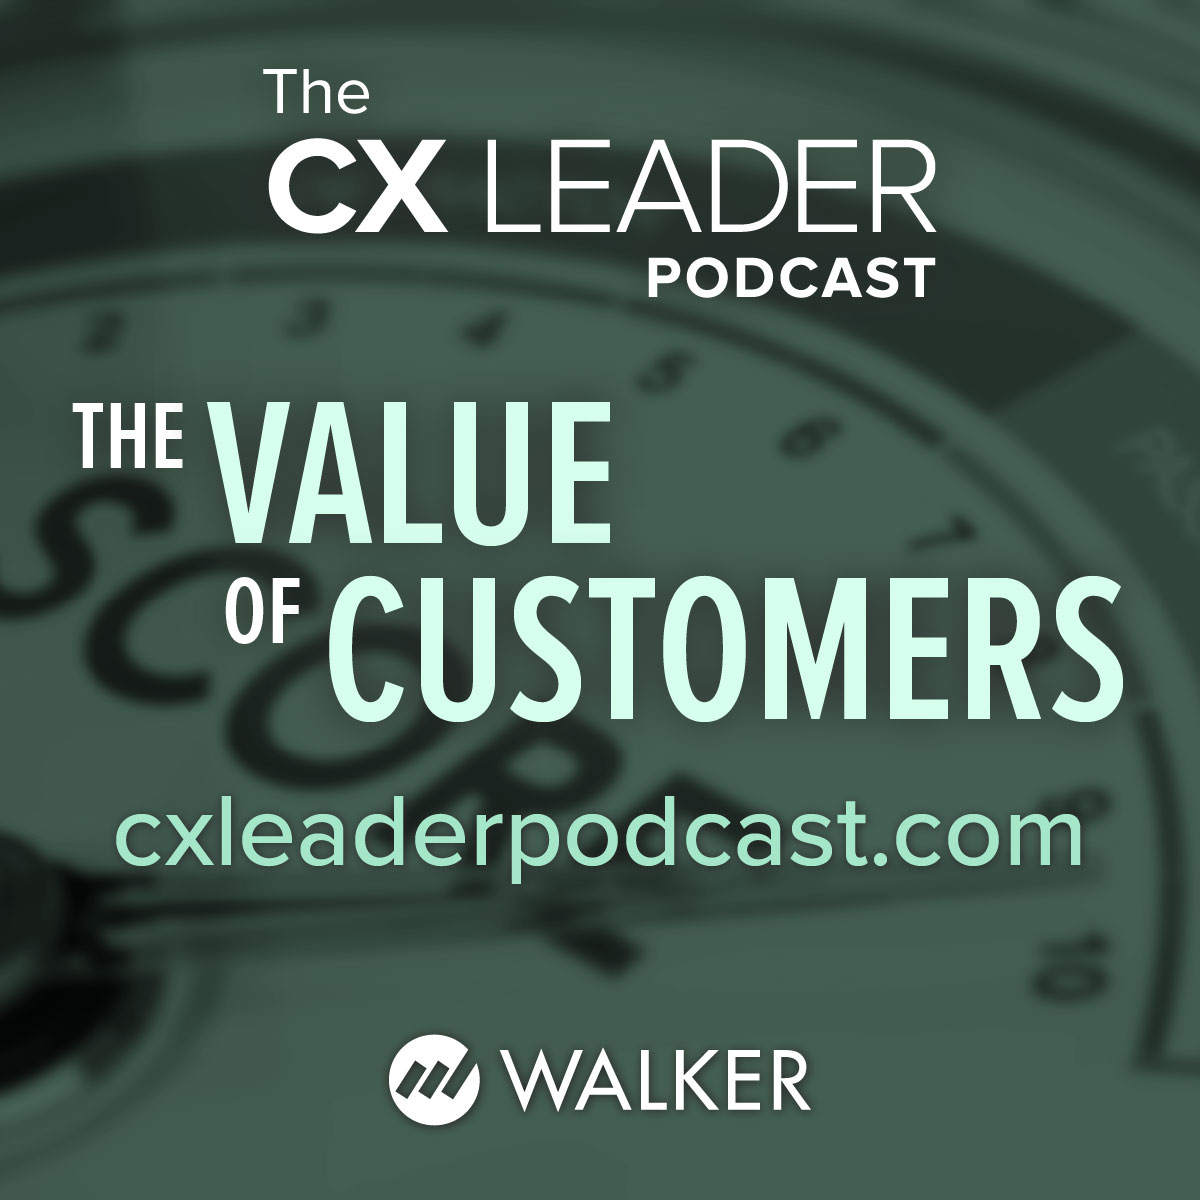 The Value of Customers